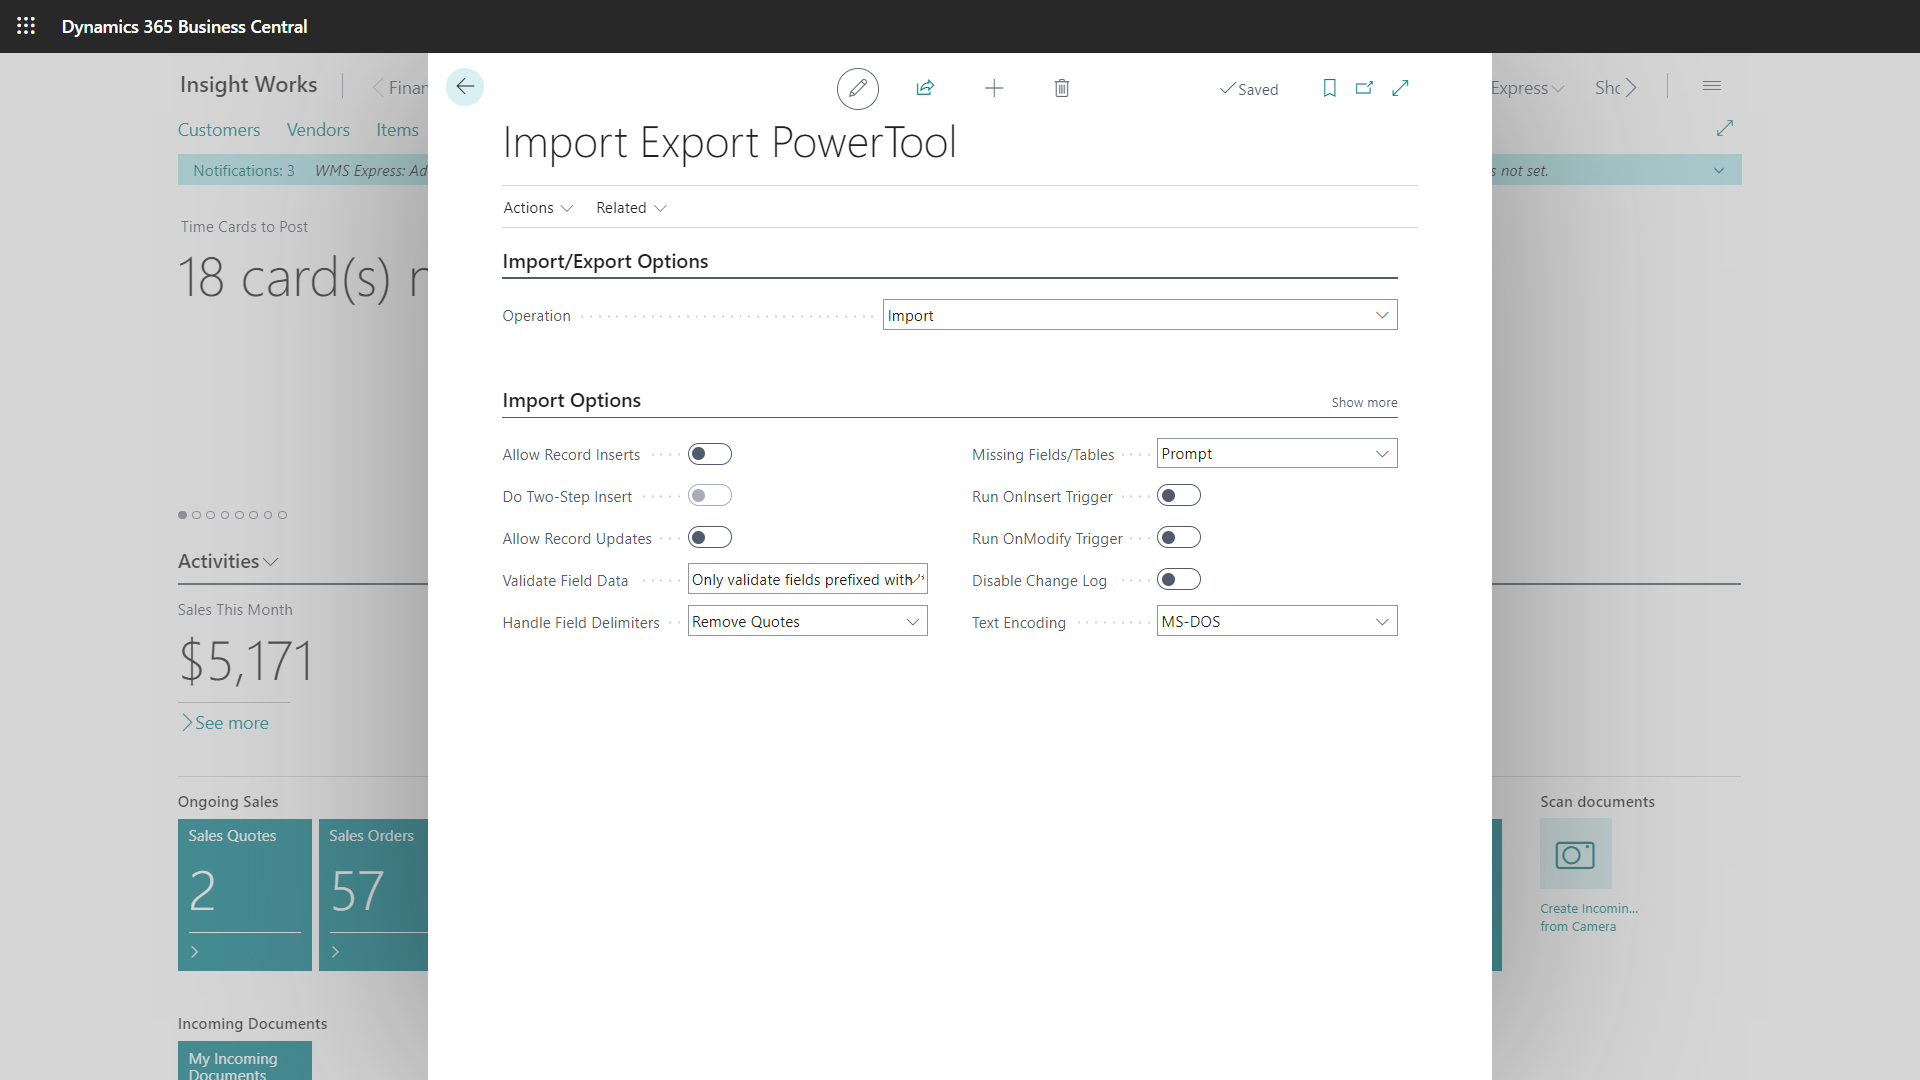 Master your data migration tasks with comprehensive import options, including Allow Record Inserts, Do Two-Stop Insert, Allow Record Update, Disable Change Log, Validate Field Data, and more.